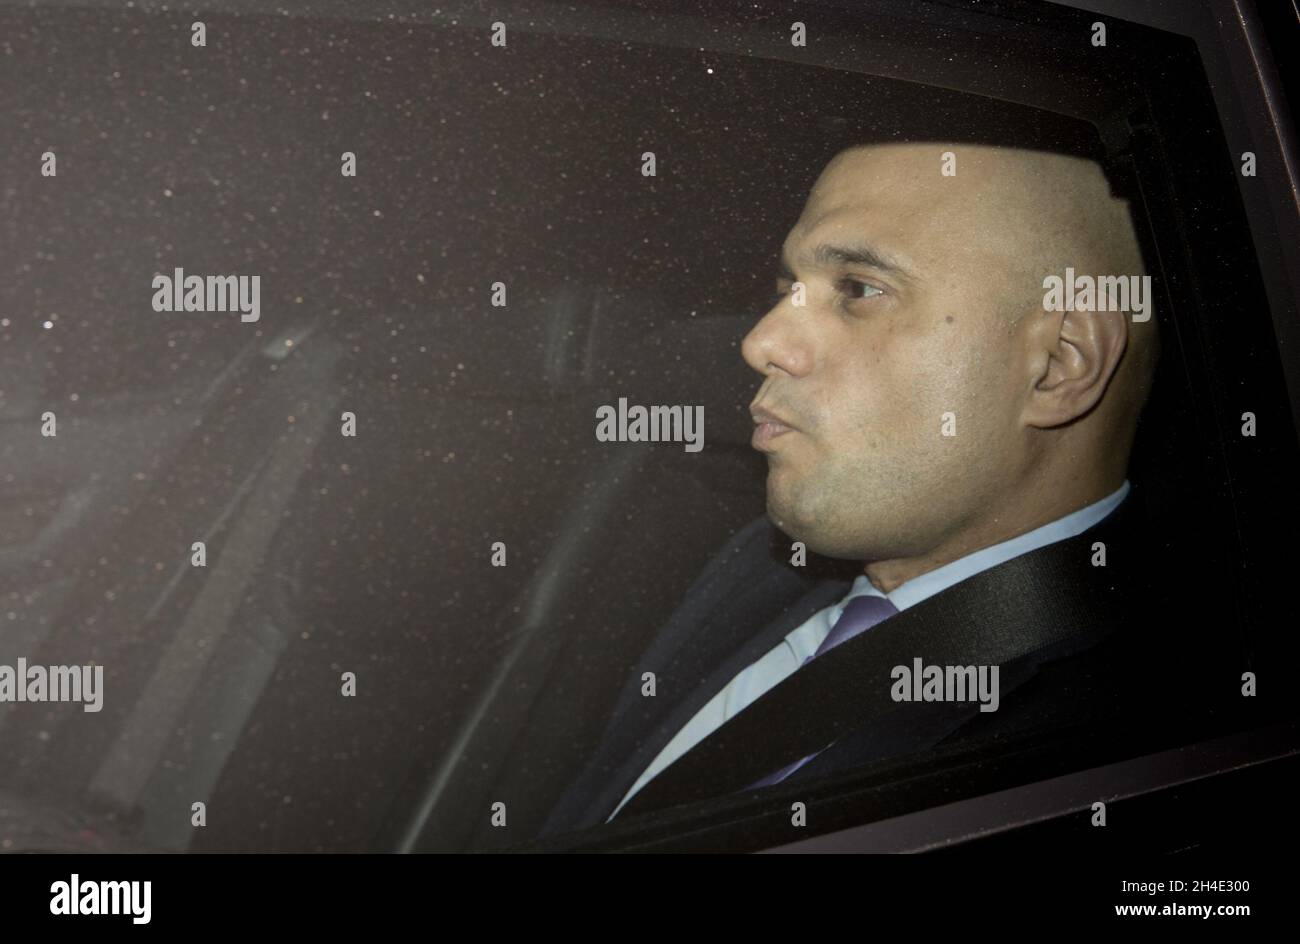 Home Secretary Sajid Javid is driven out the Houses of Parliament , London, following the no confidence vote to Prime Minister Theresa May. Picture dated: Wednesday December 12, 2018 Stock Photo